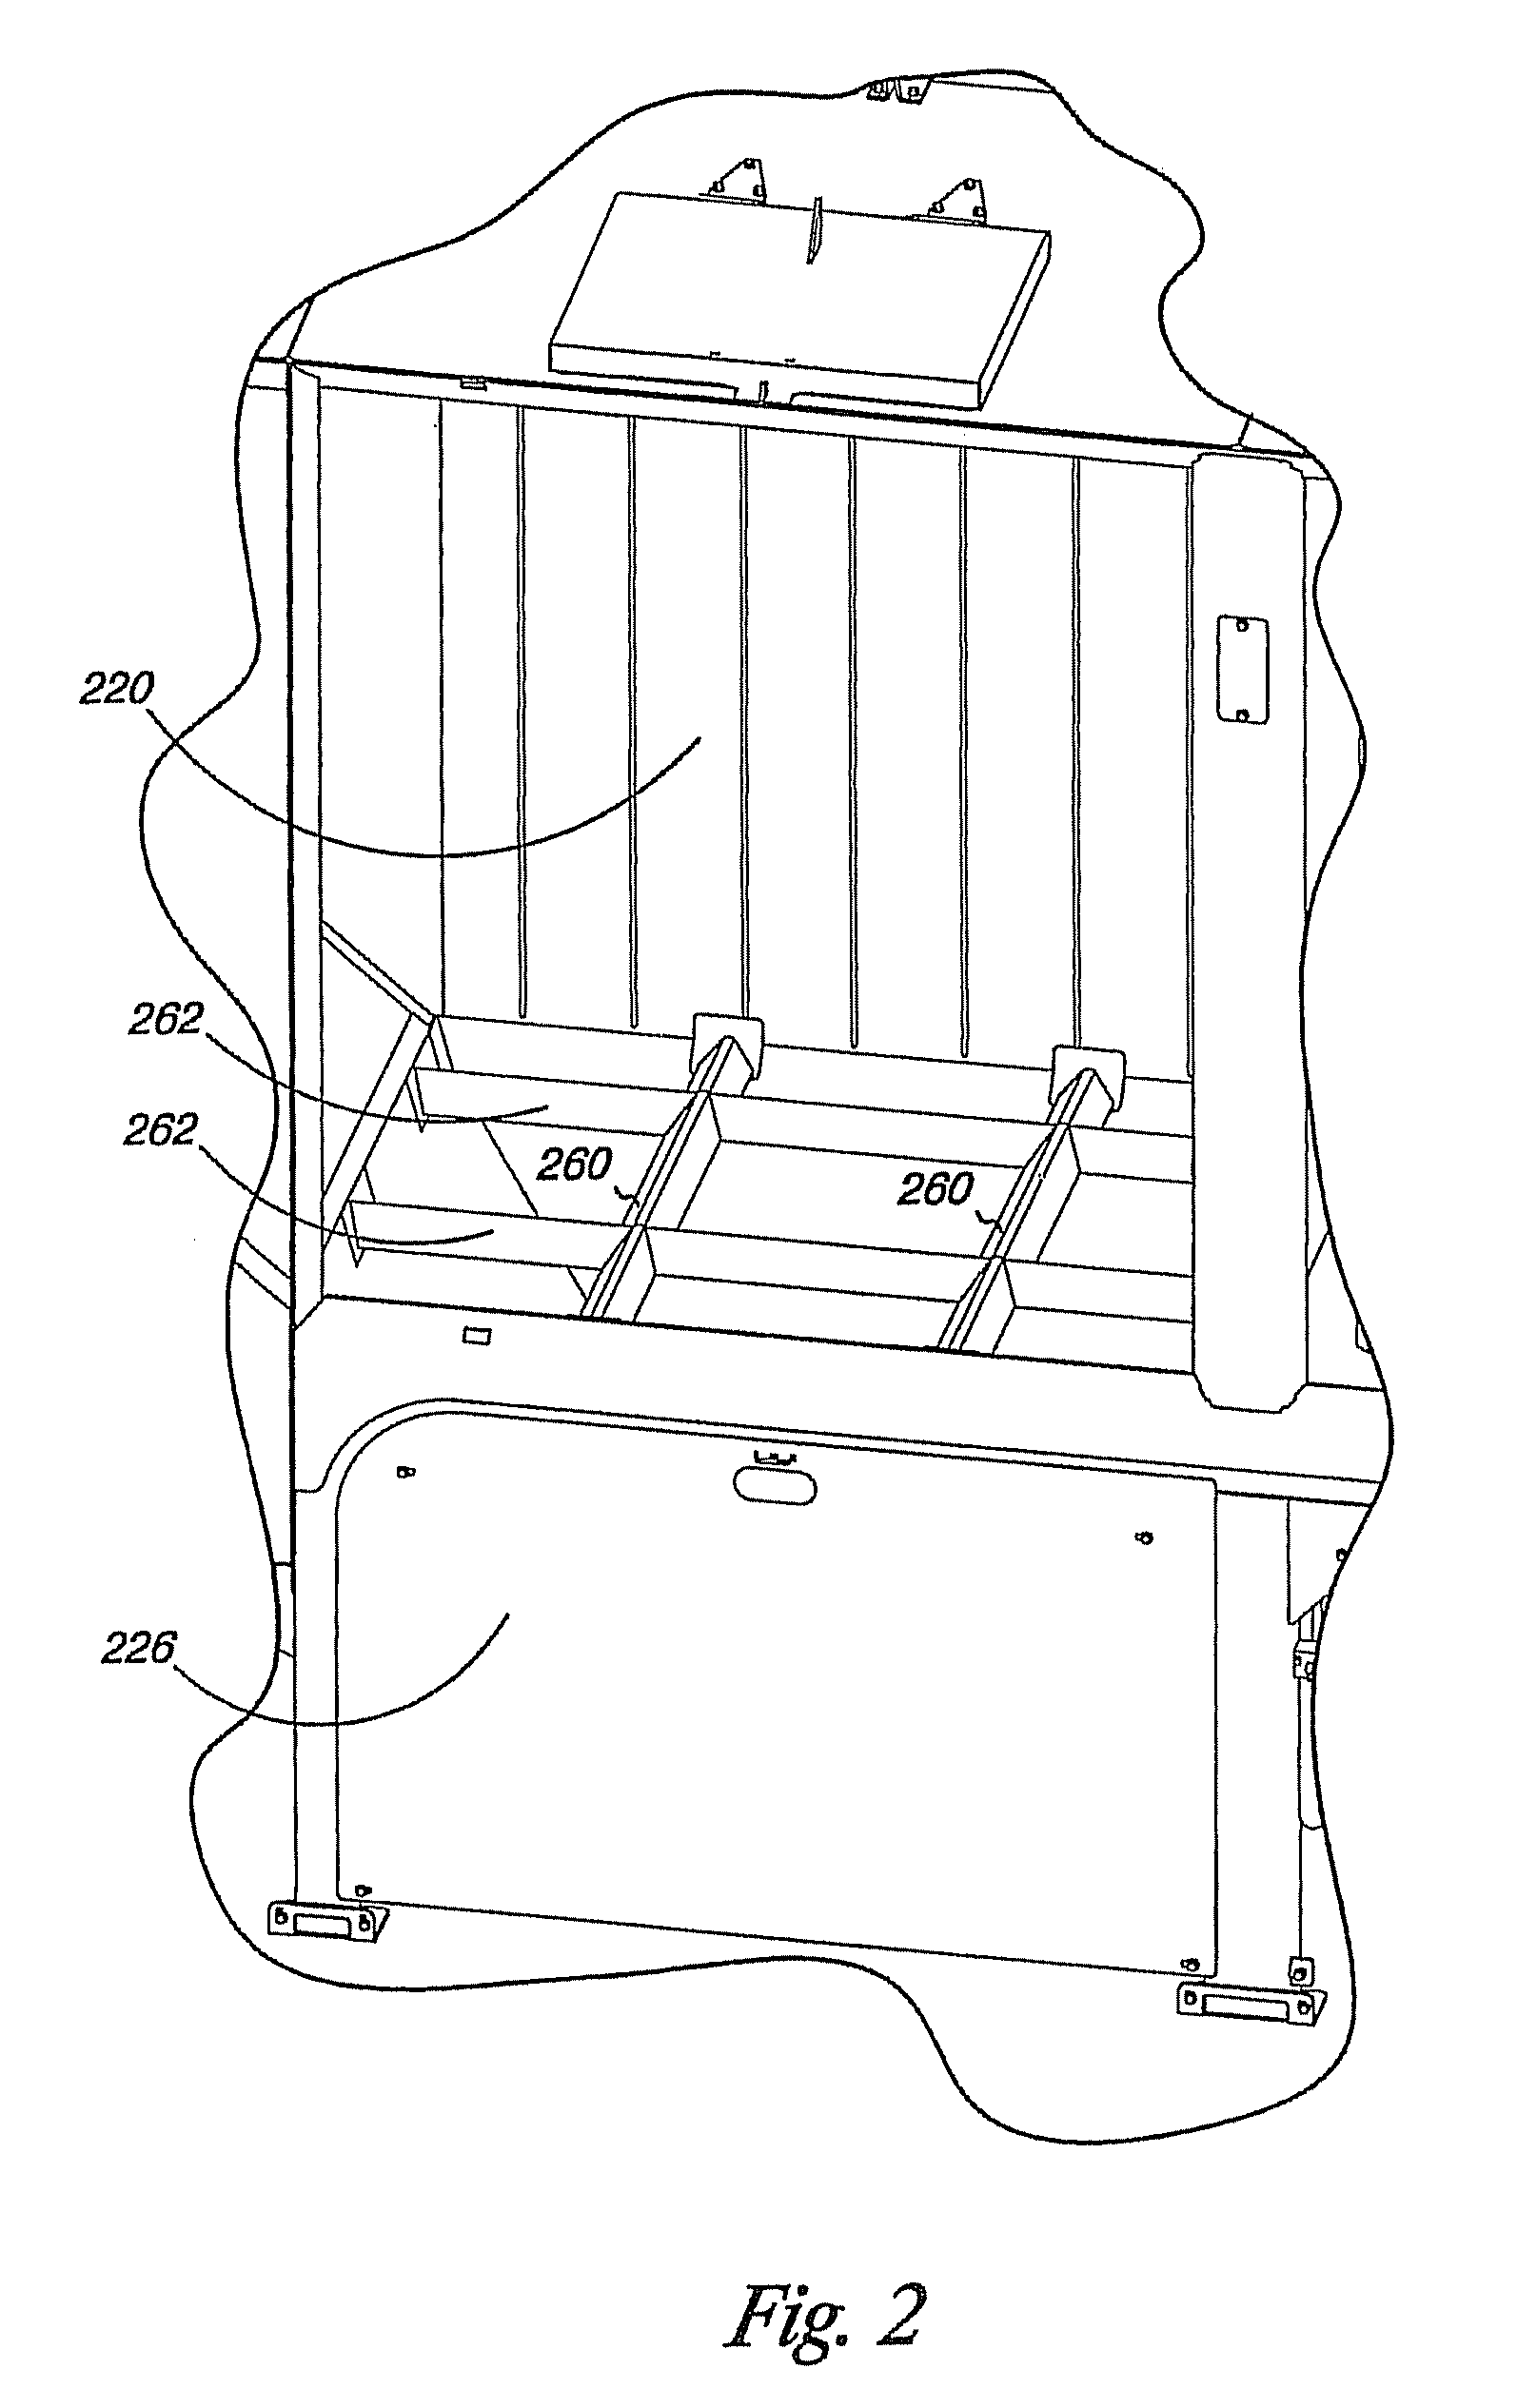 Apparatus and method for coordinating automated package and bulk dispensing